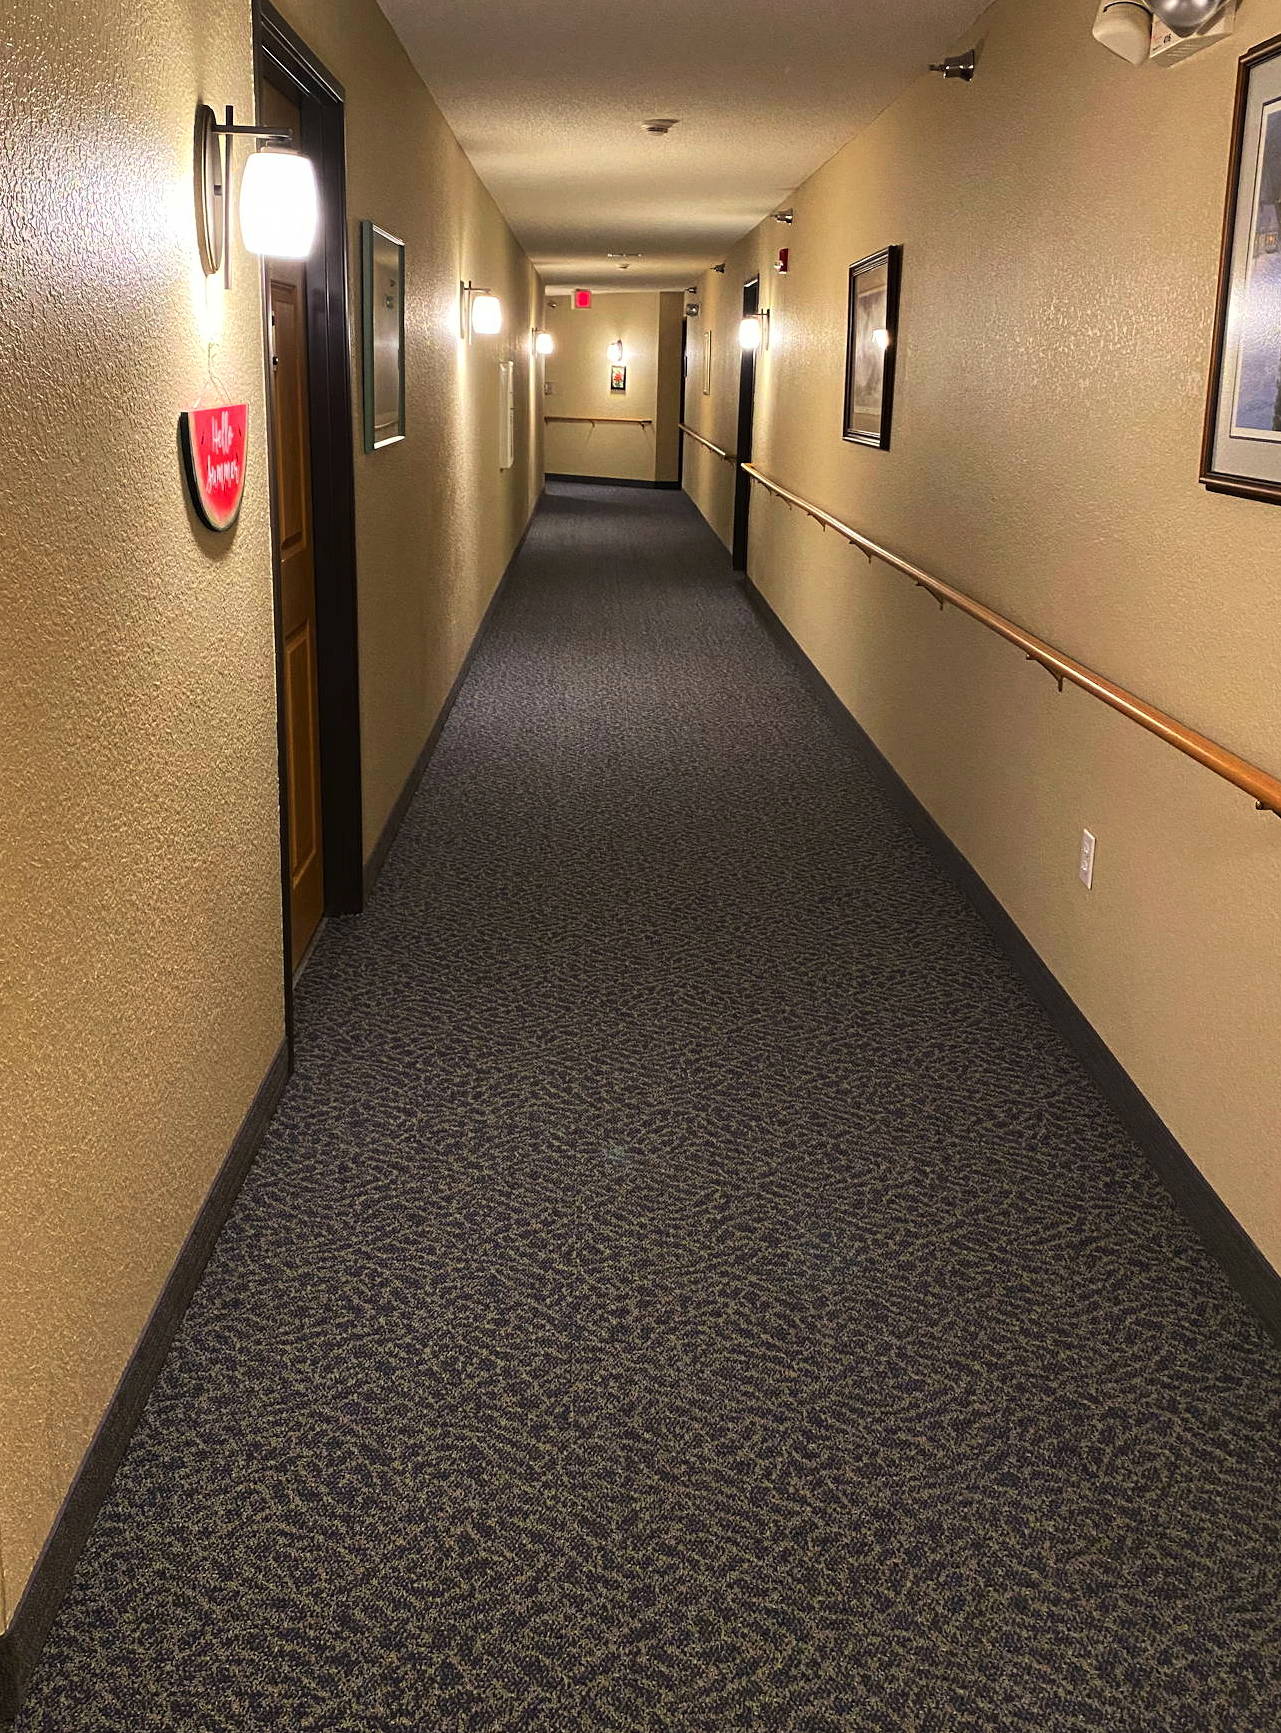 Valley View Senior Co-op Wirth New Carpet Layed